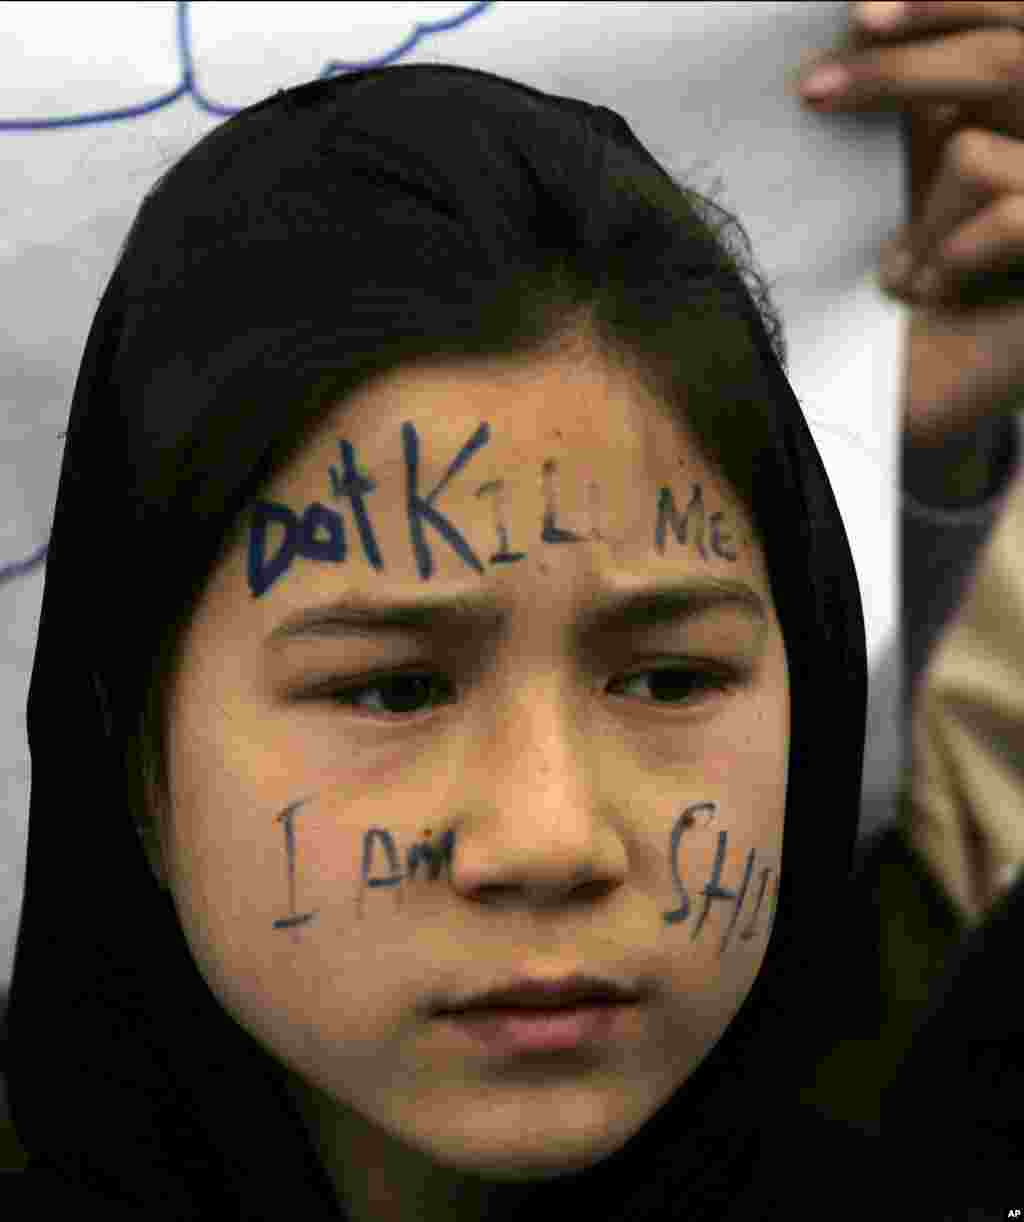 A Pakistani Shiite girl takes part in a sit-in protest with others to condemn recent bombing which killed scores of people, in Quetta, Pakistan.